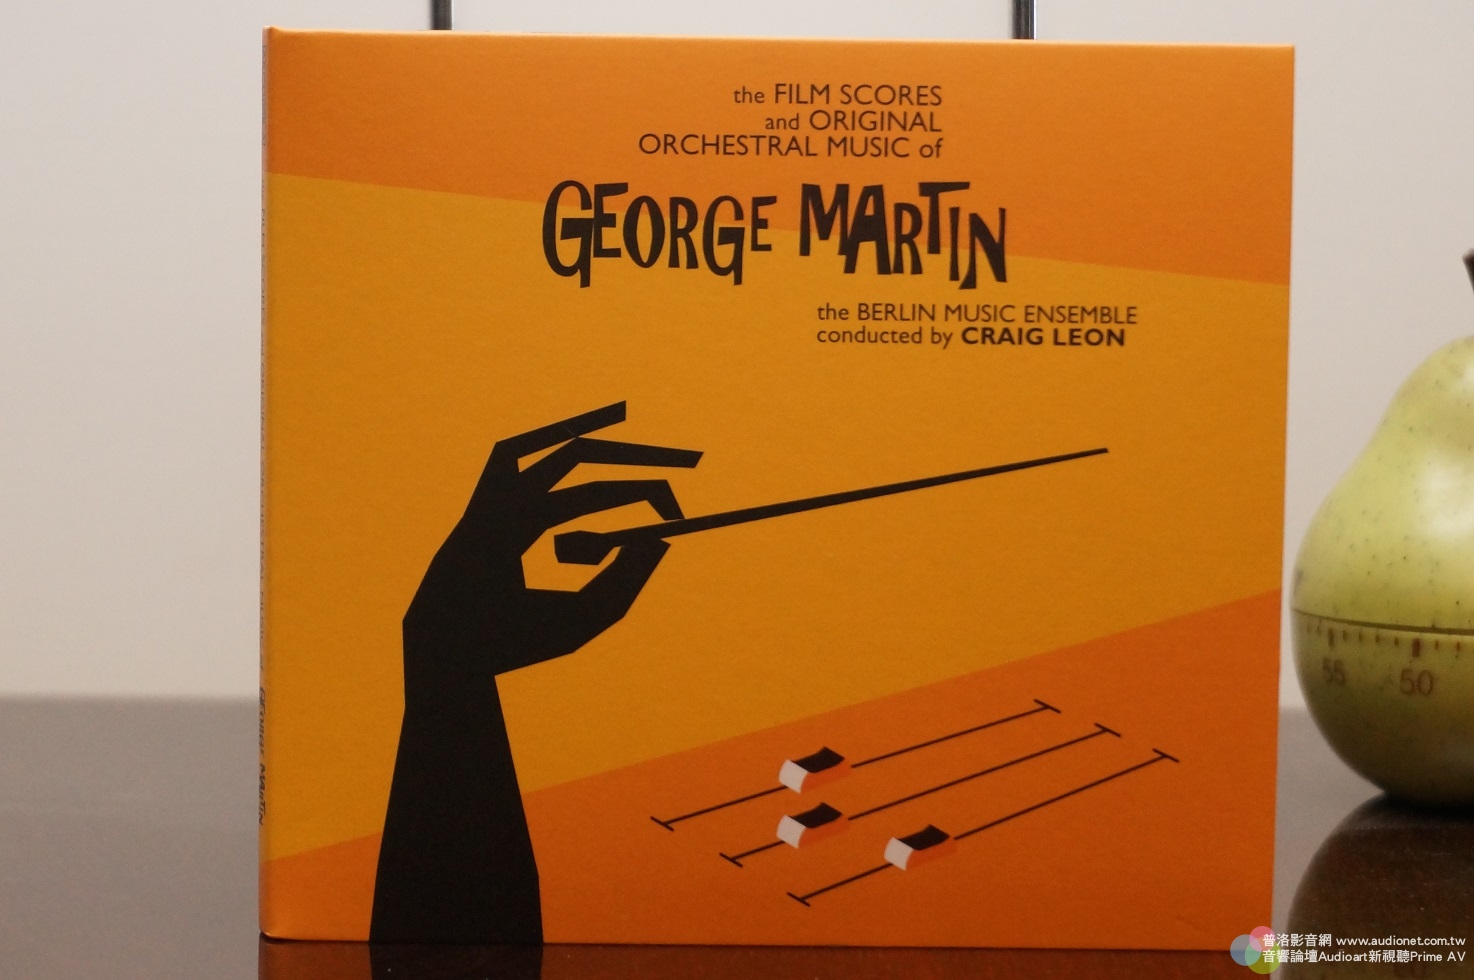 The Film Scores and Original Orchestra Music of George Martin